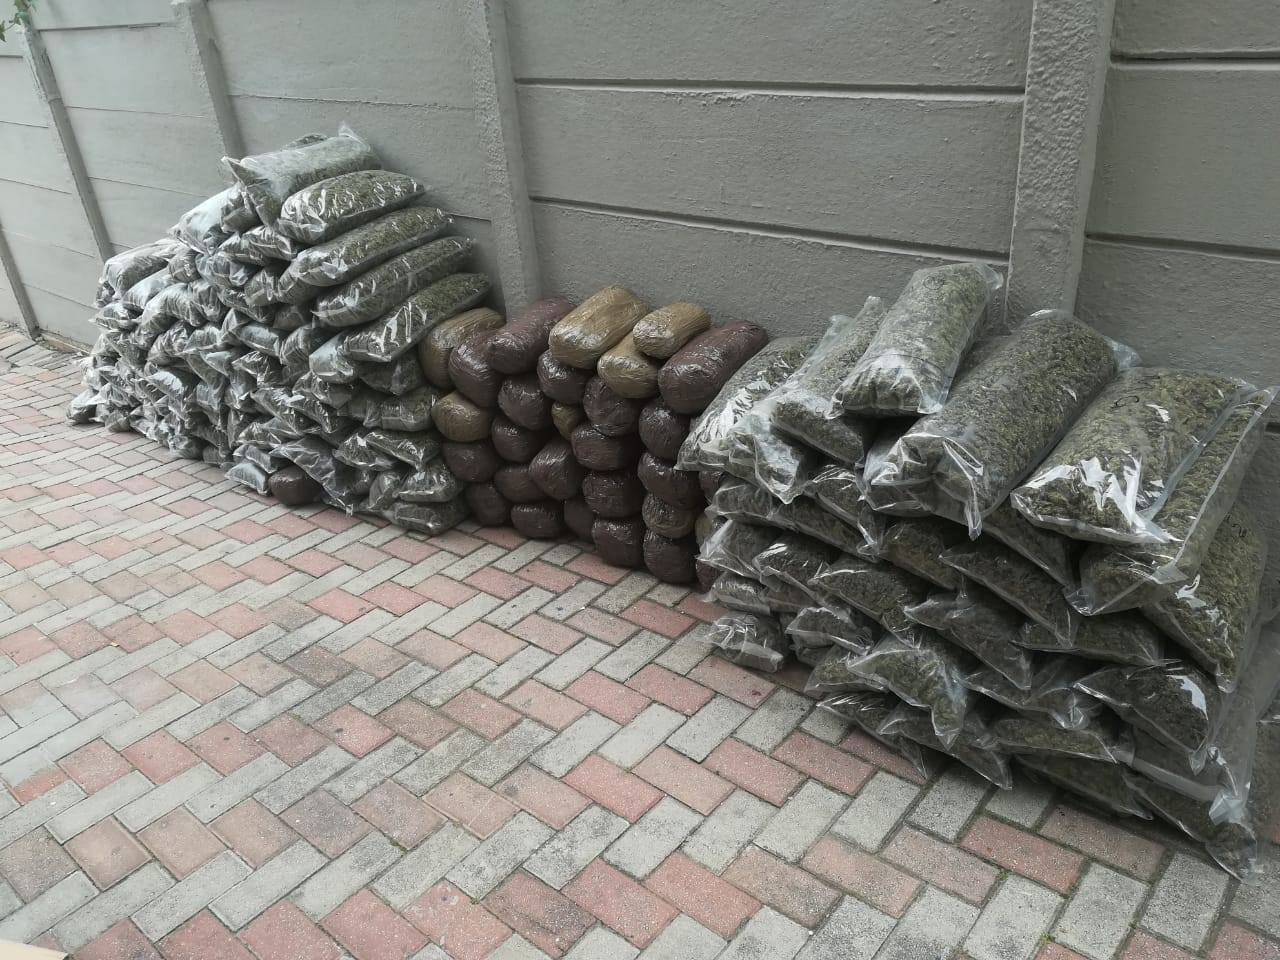 Large quantity of dagga confiscated during an intelligence-driven operation in Cotswold